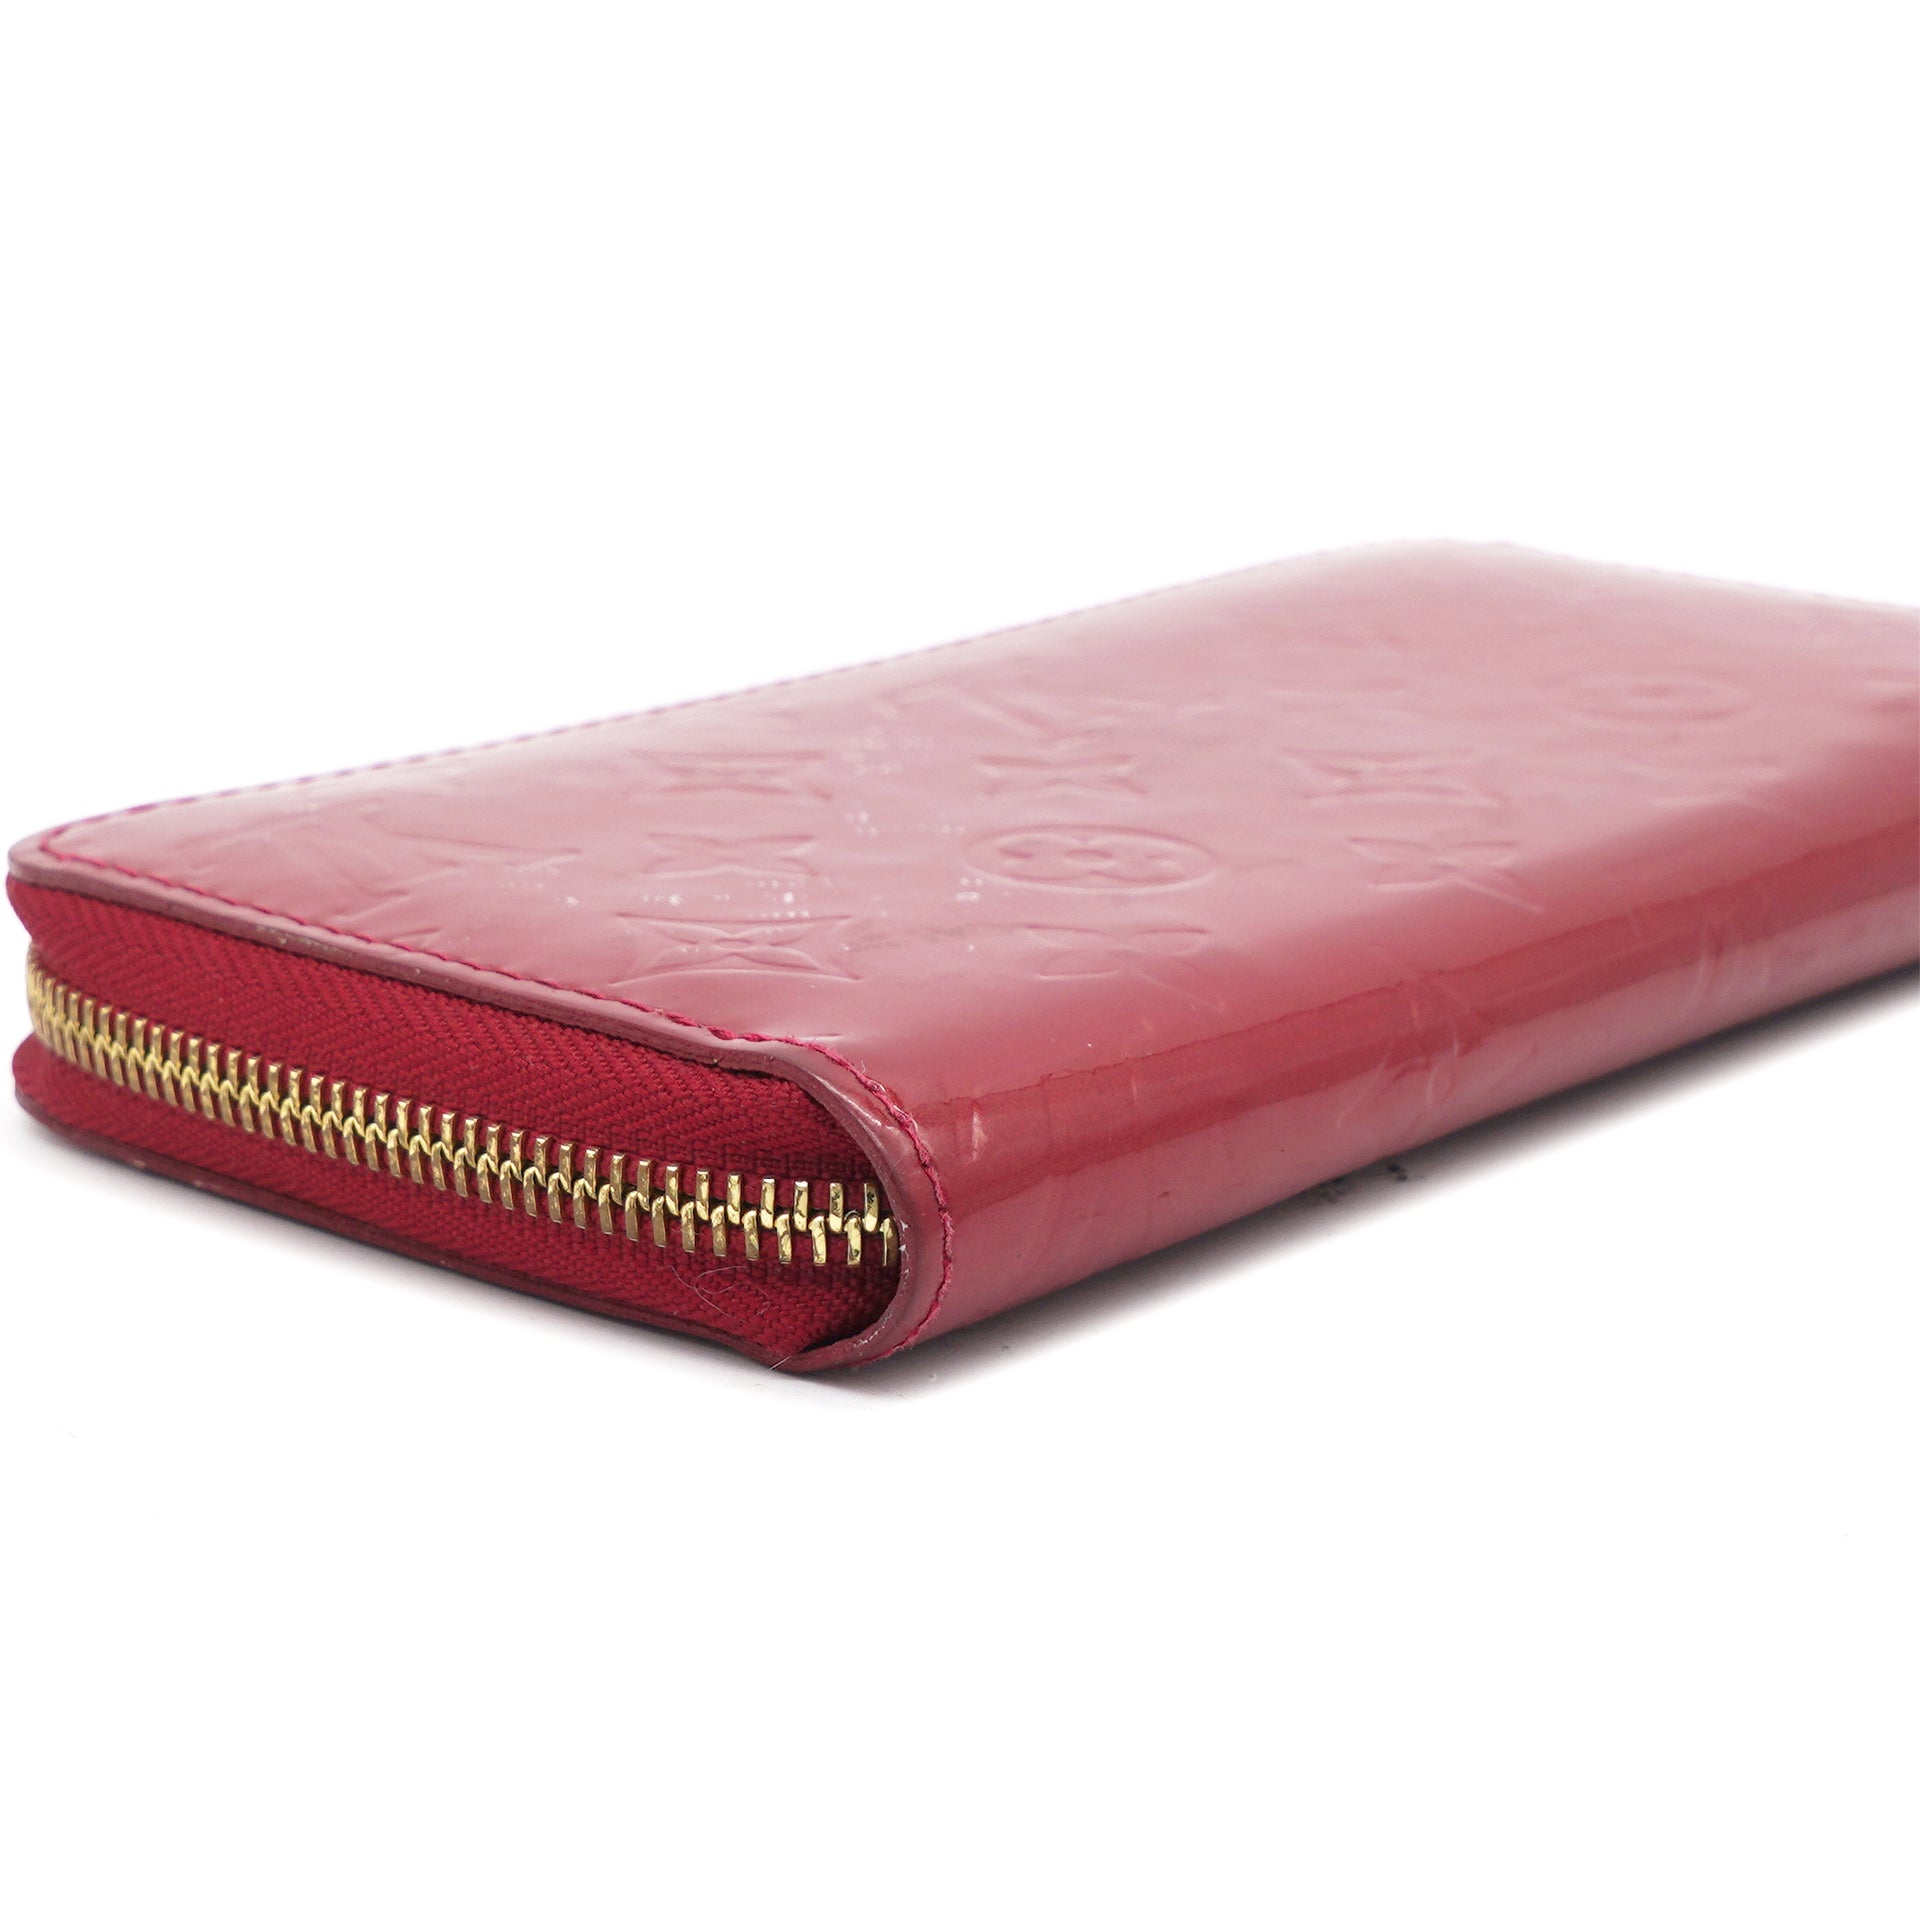 Louis Vuitton Patent Zippy Wallet in Red